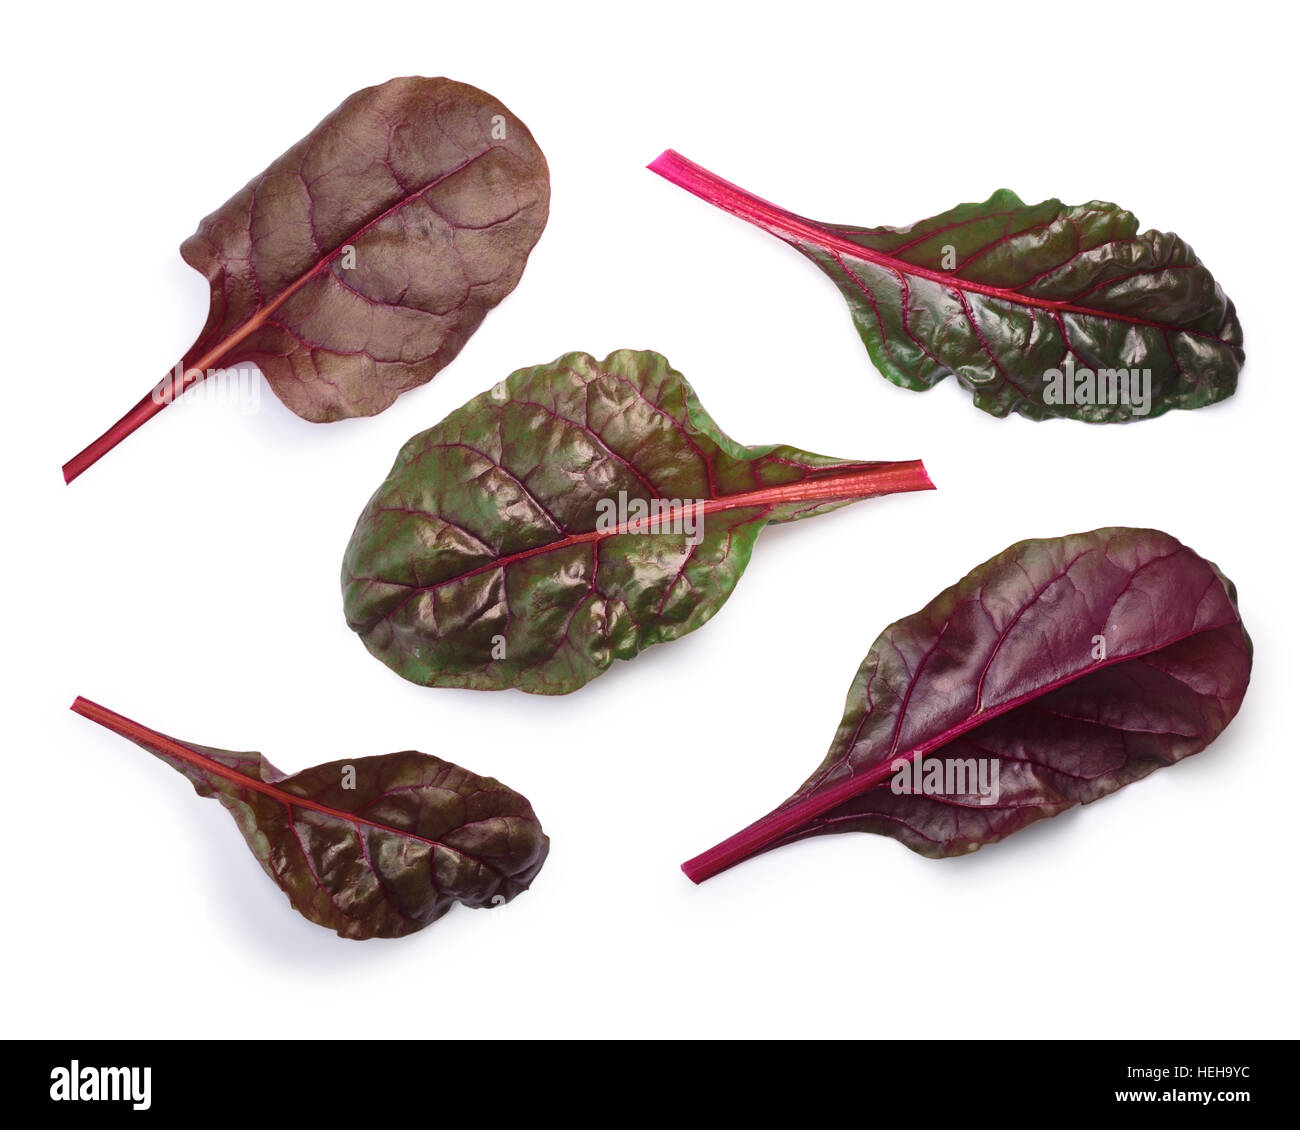 Top view of Leaves of Swiss chard or Mangold (Beta vulgaris subsp. Cicla-Group). Clipping paths, shadows separated Stock Photo